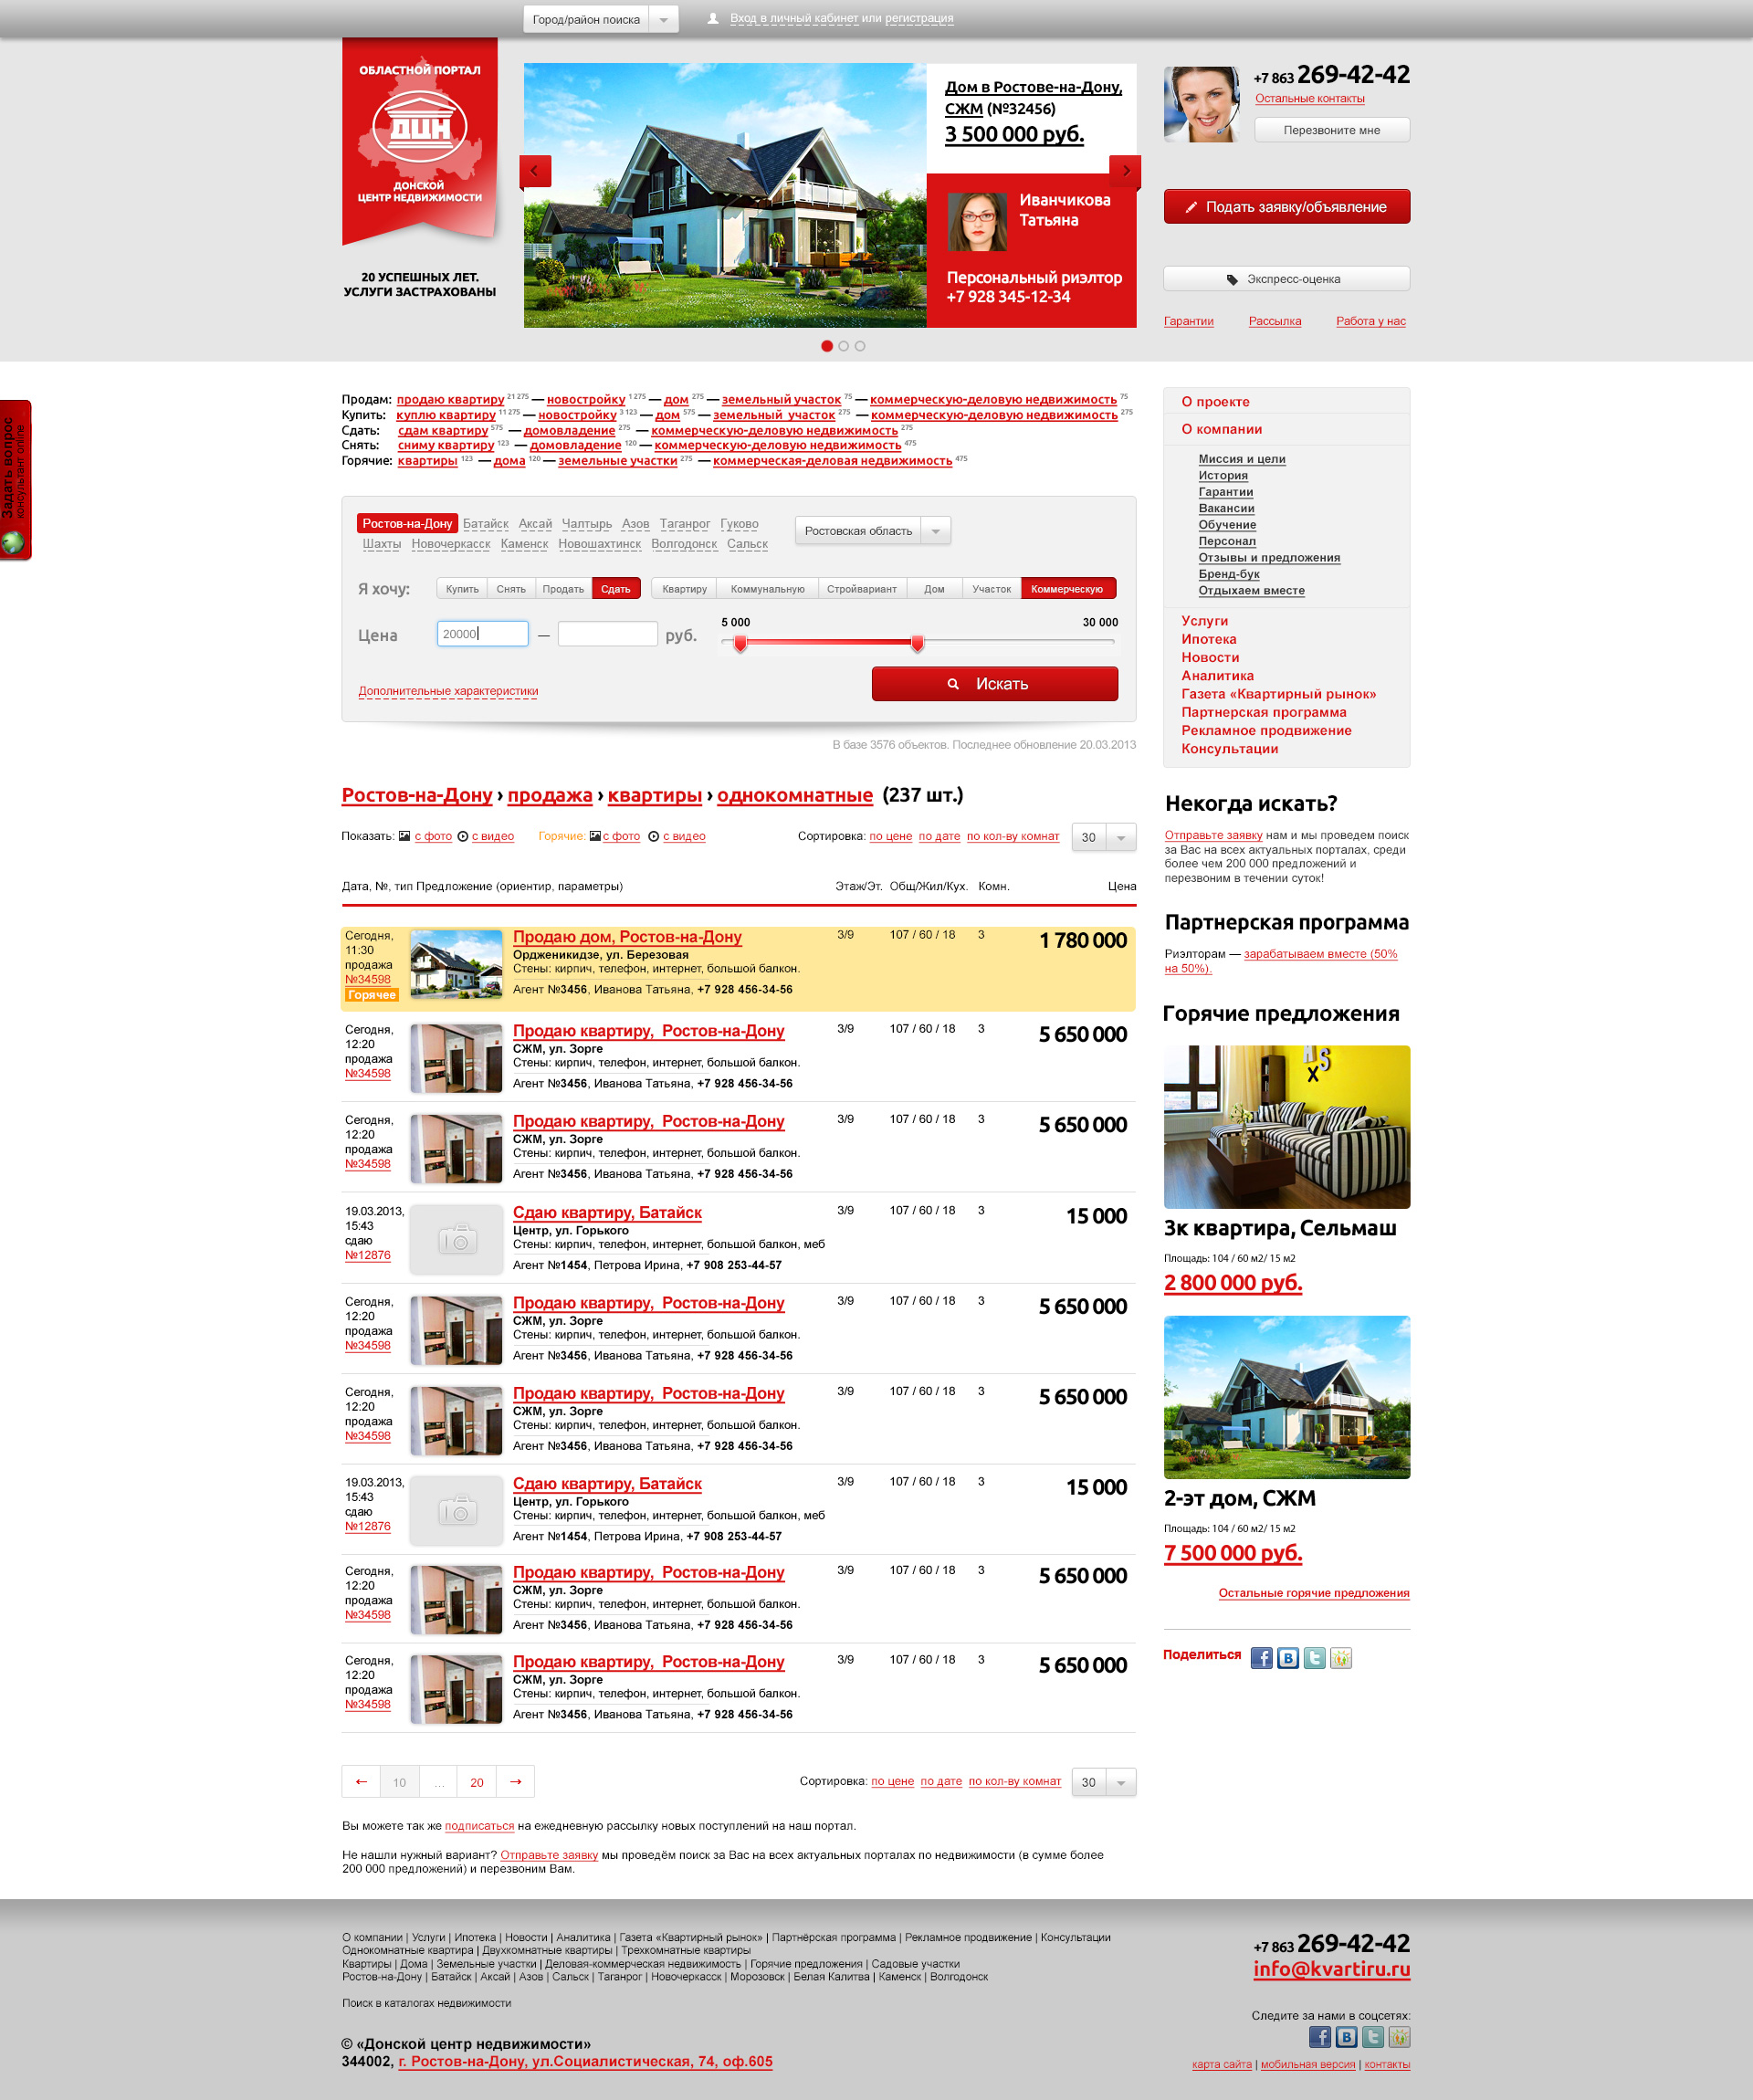 Design and templates for realty agency Â«Don Realty CenterÂ»